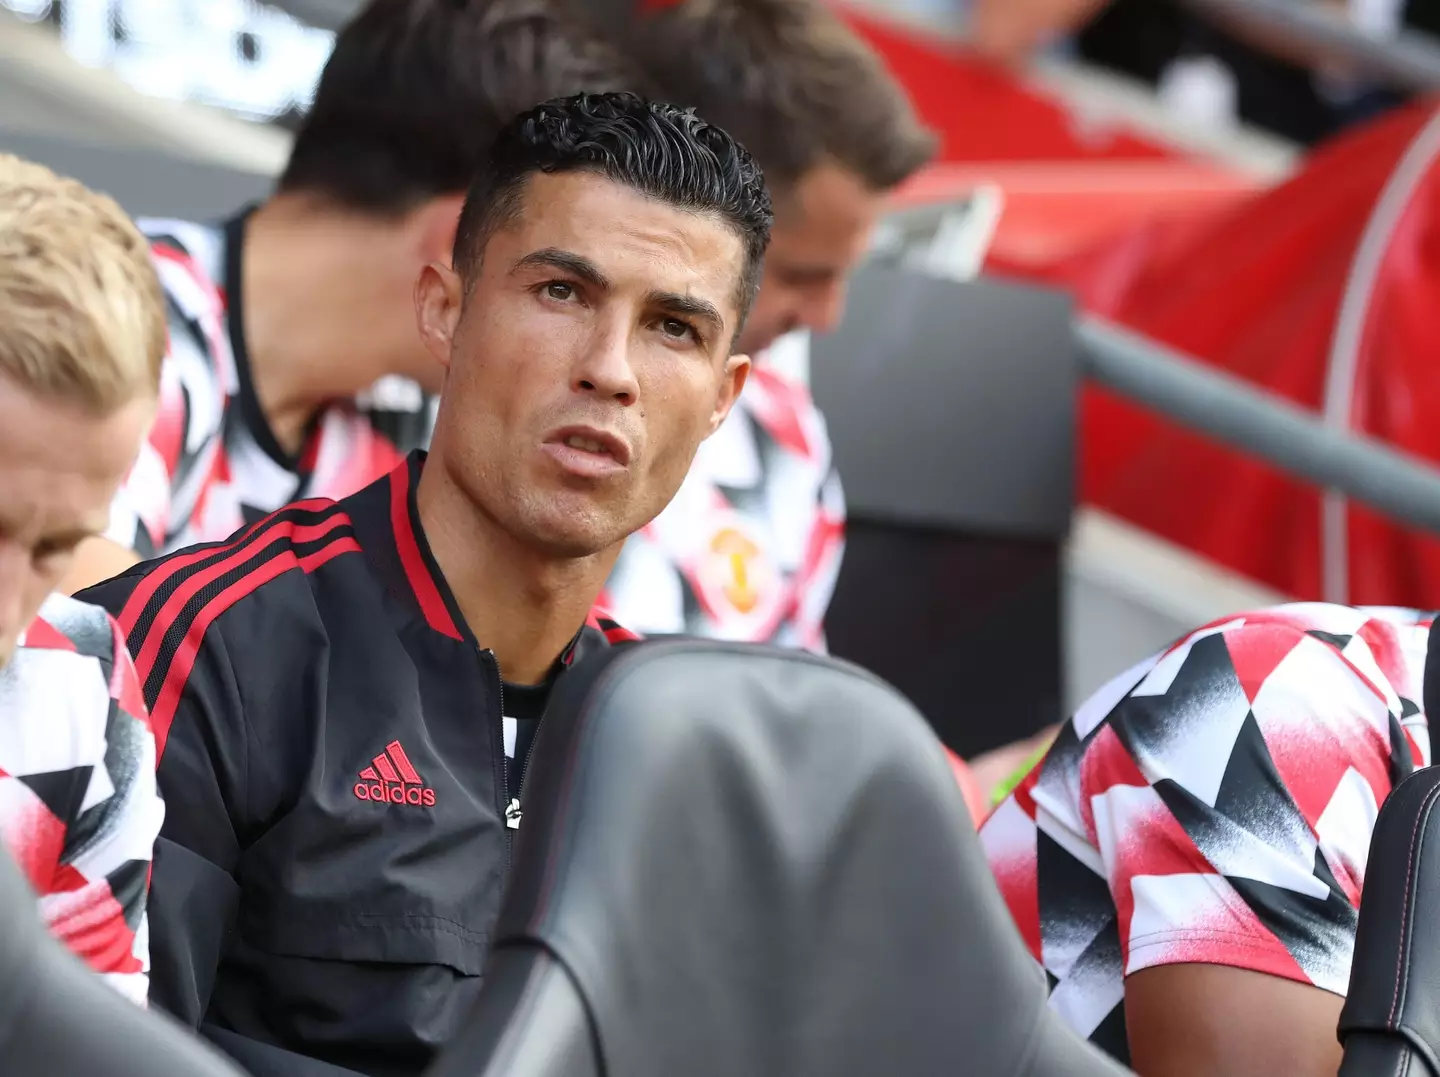 Ronaldo may have to get used to sitting on the bench. Image: Alamy